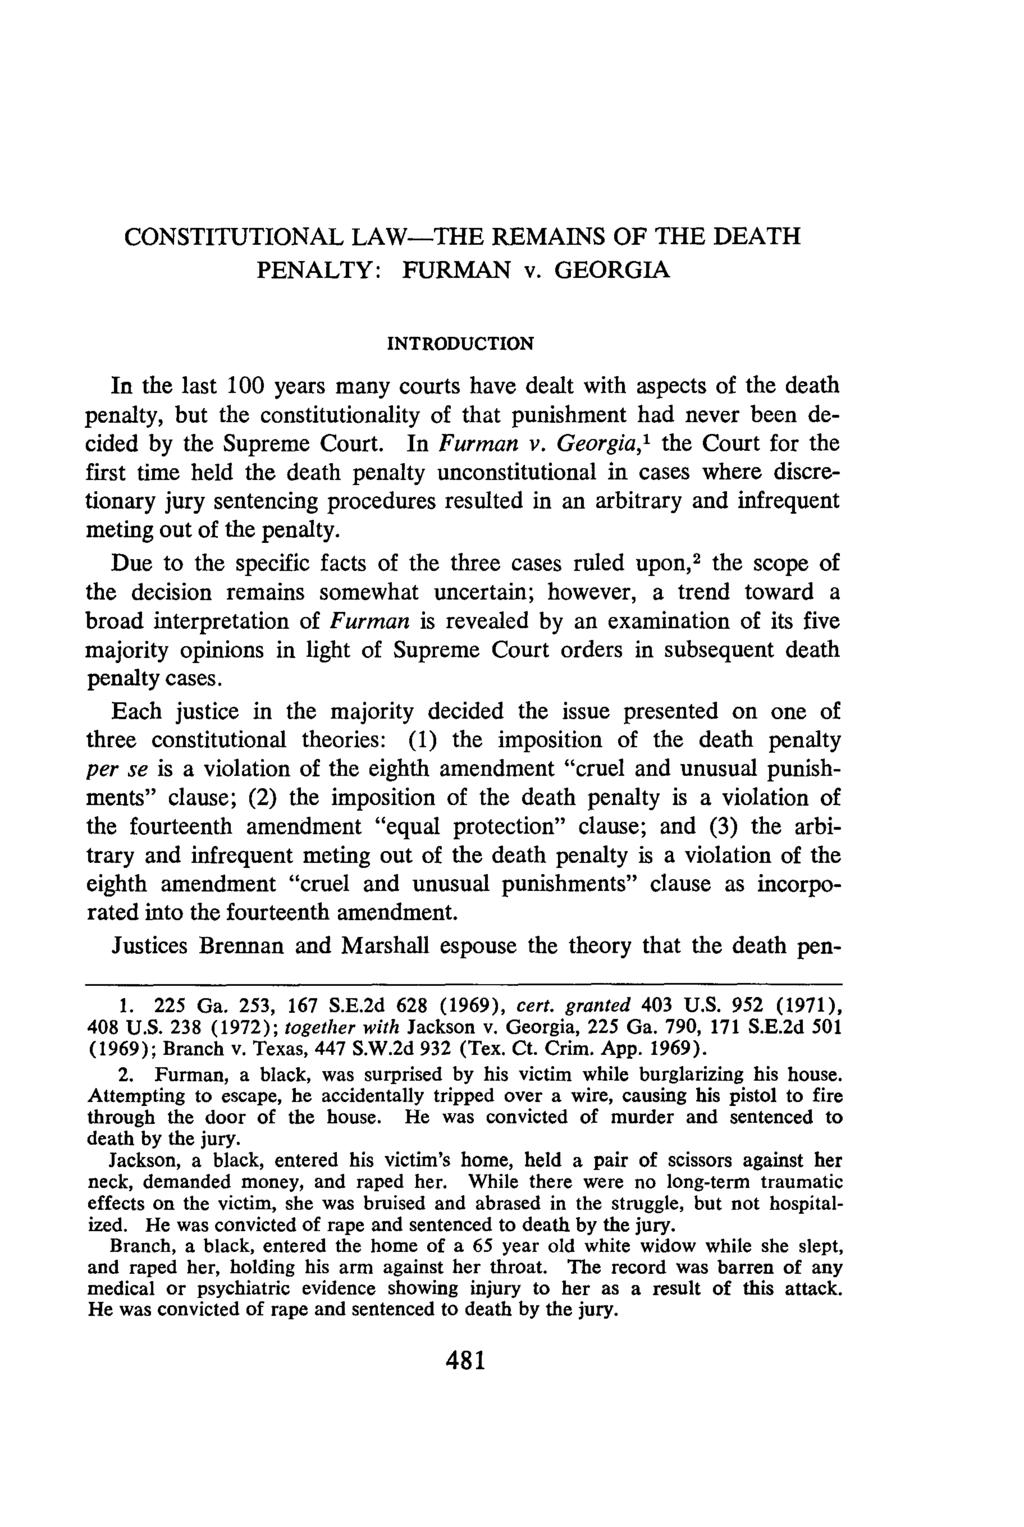 CONSTITUTIONAL LAW-THE REMAINS OF THE DEATH PENALTY: FURMAN v.